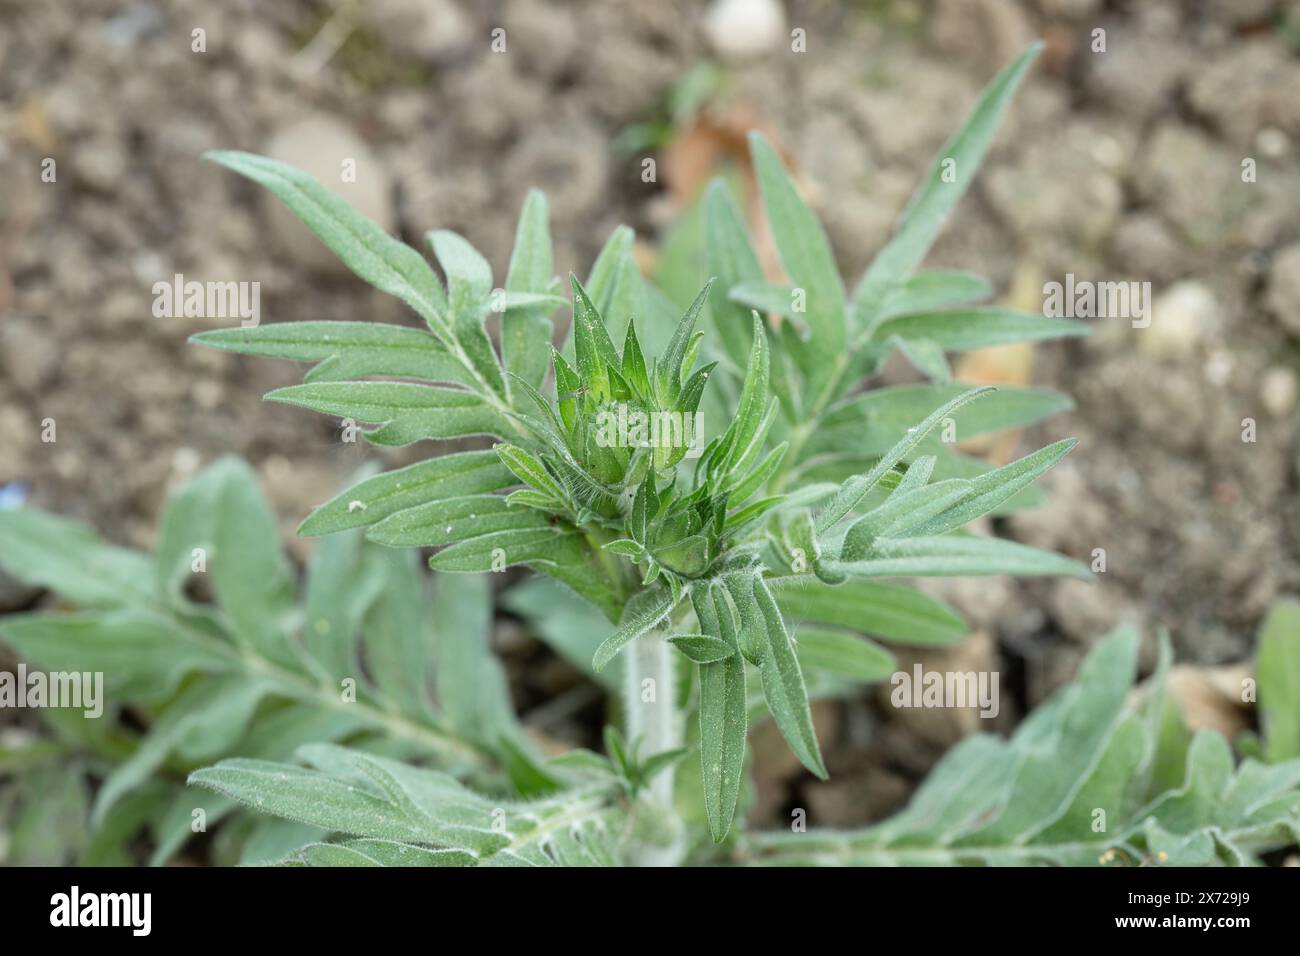 Habit of a field scabious (Knautia arvensis). Appearance of the plant before blooming in spring. Stock Photo